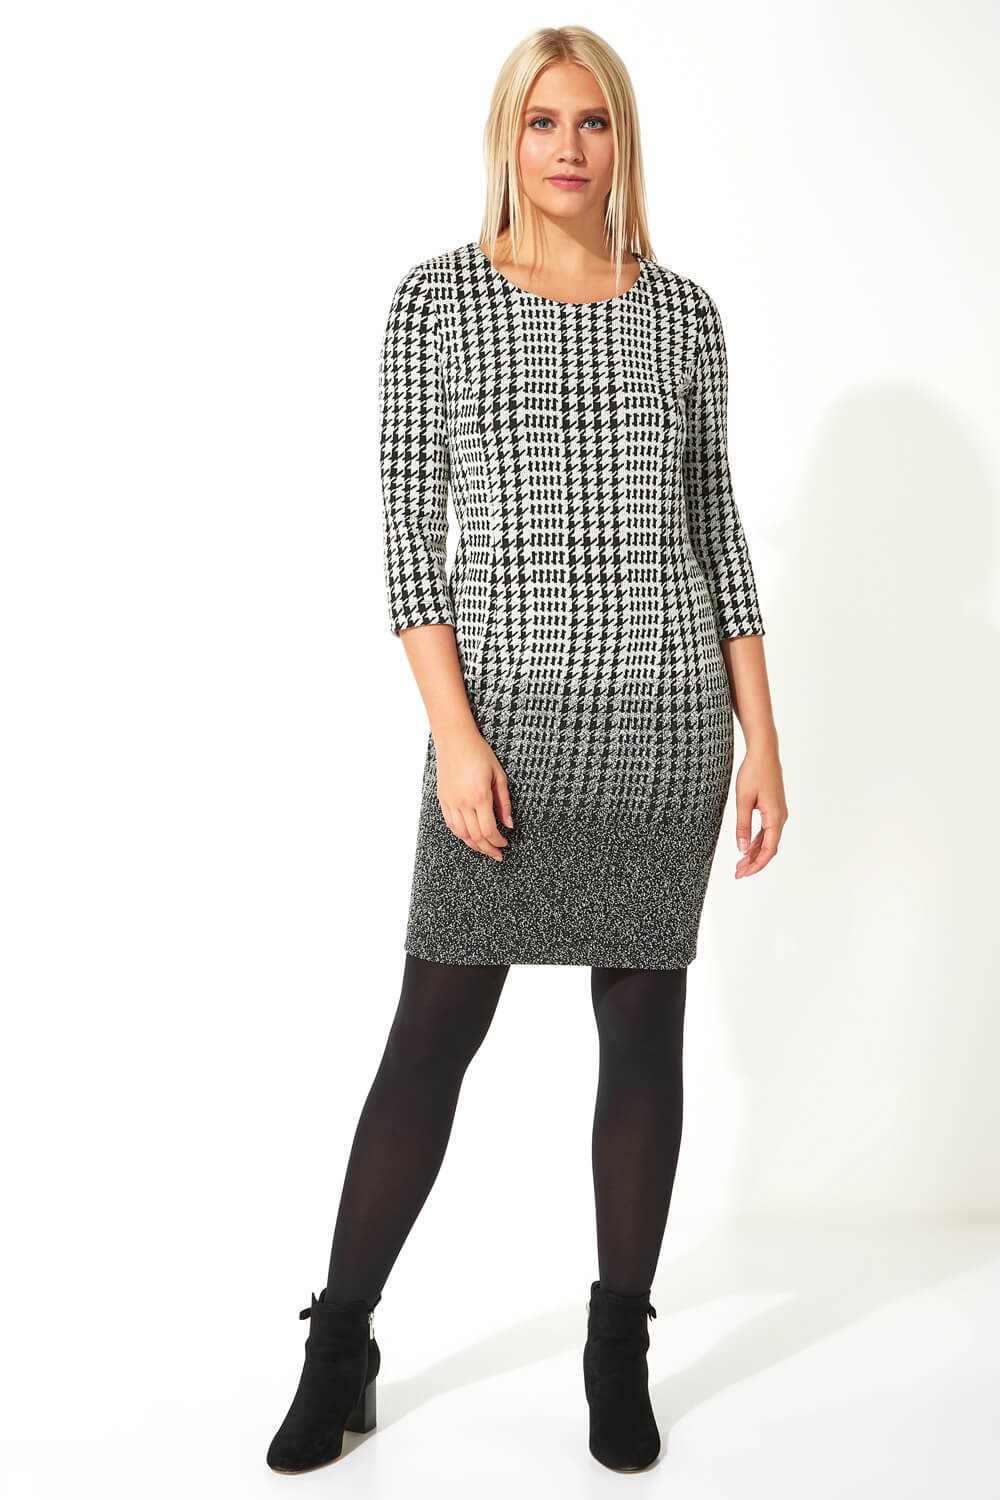 Black Dogtooth Check Ombre Textured Shift Dress, Image 2 of 5